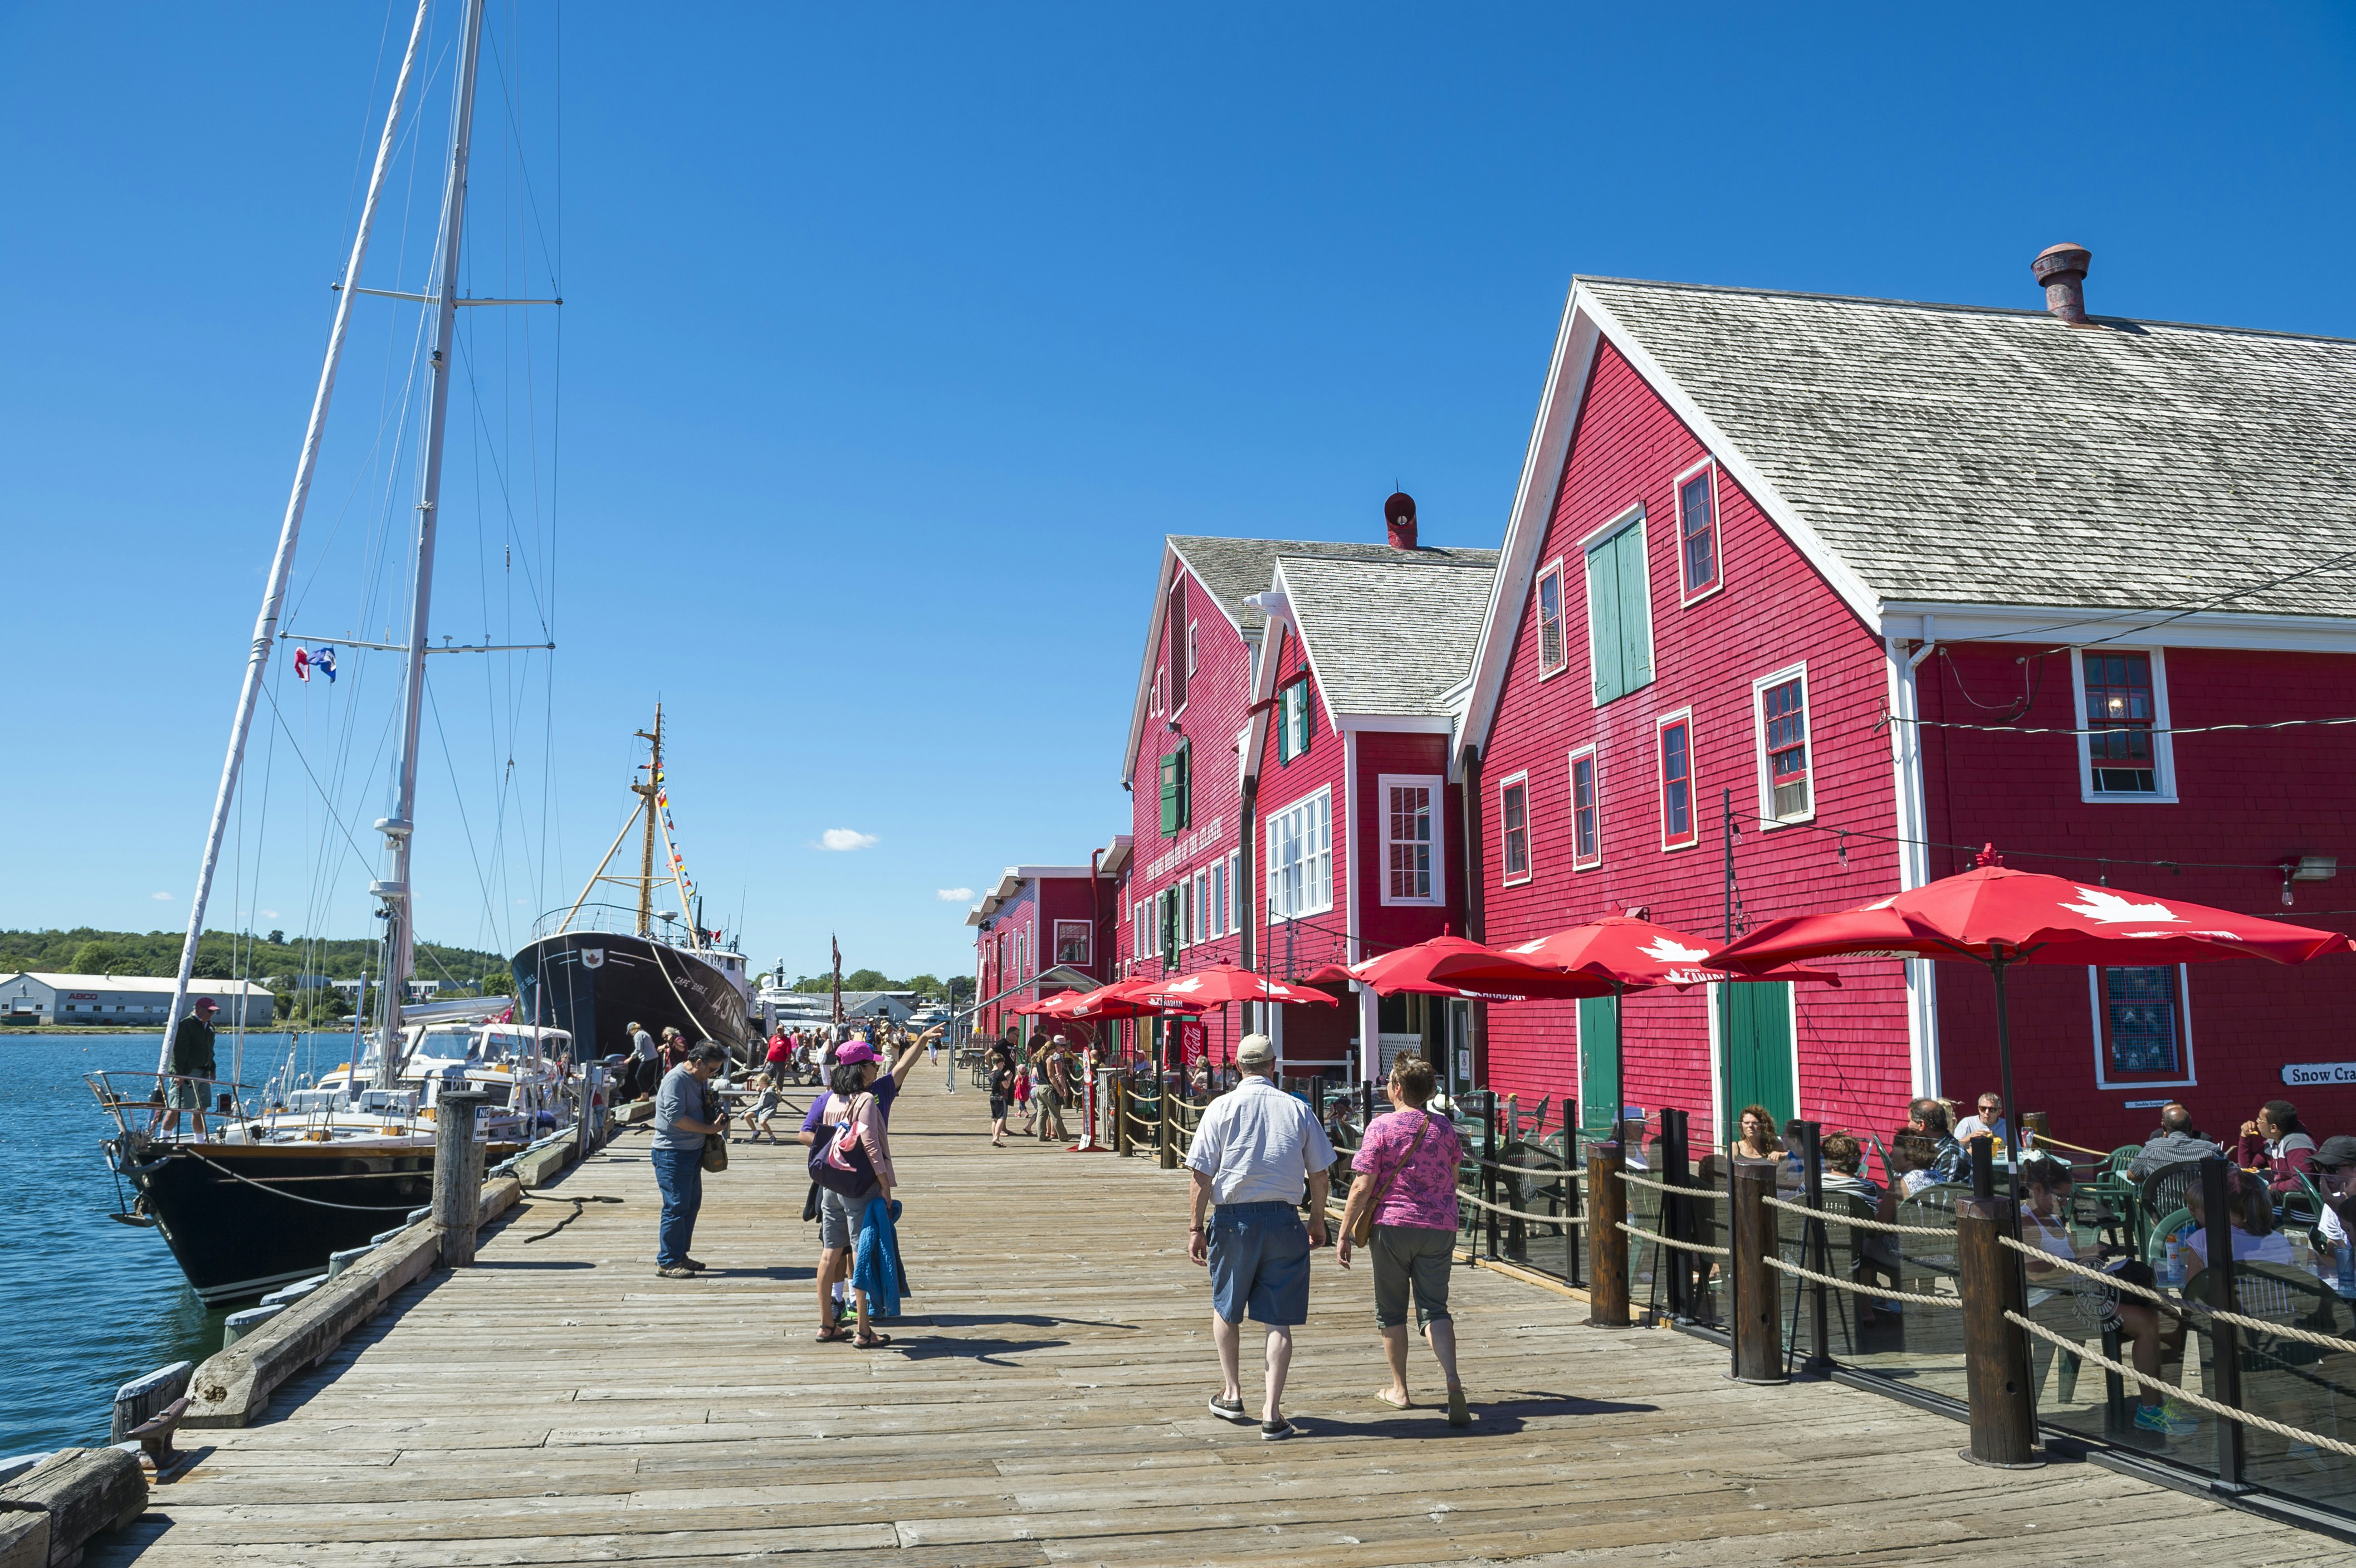 Many people walk down a wooden harbourside promenade; two large boats are moored in the water, and the red, clapperboard buildings of the Fisheries Museum of the Atlantic face the water.